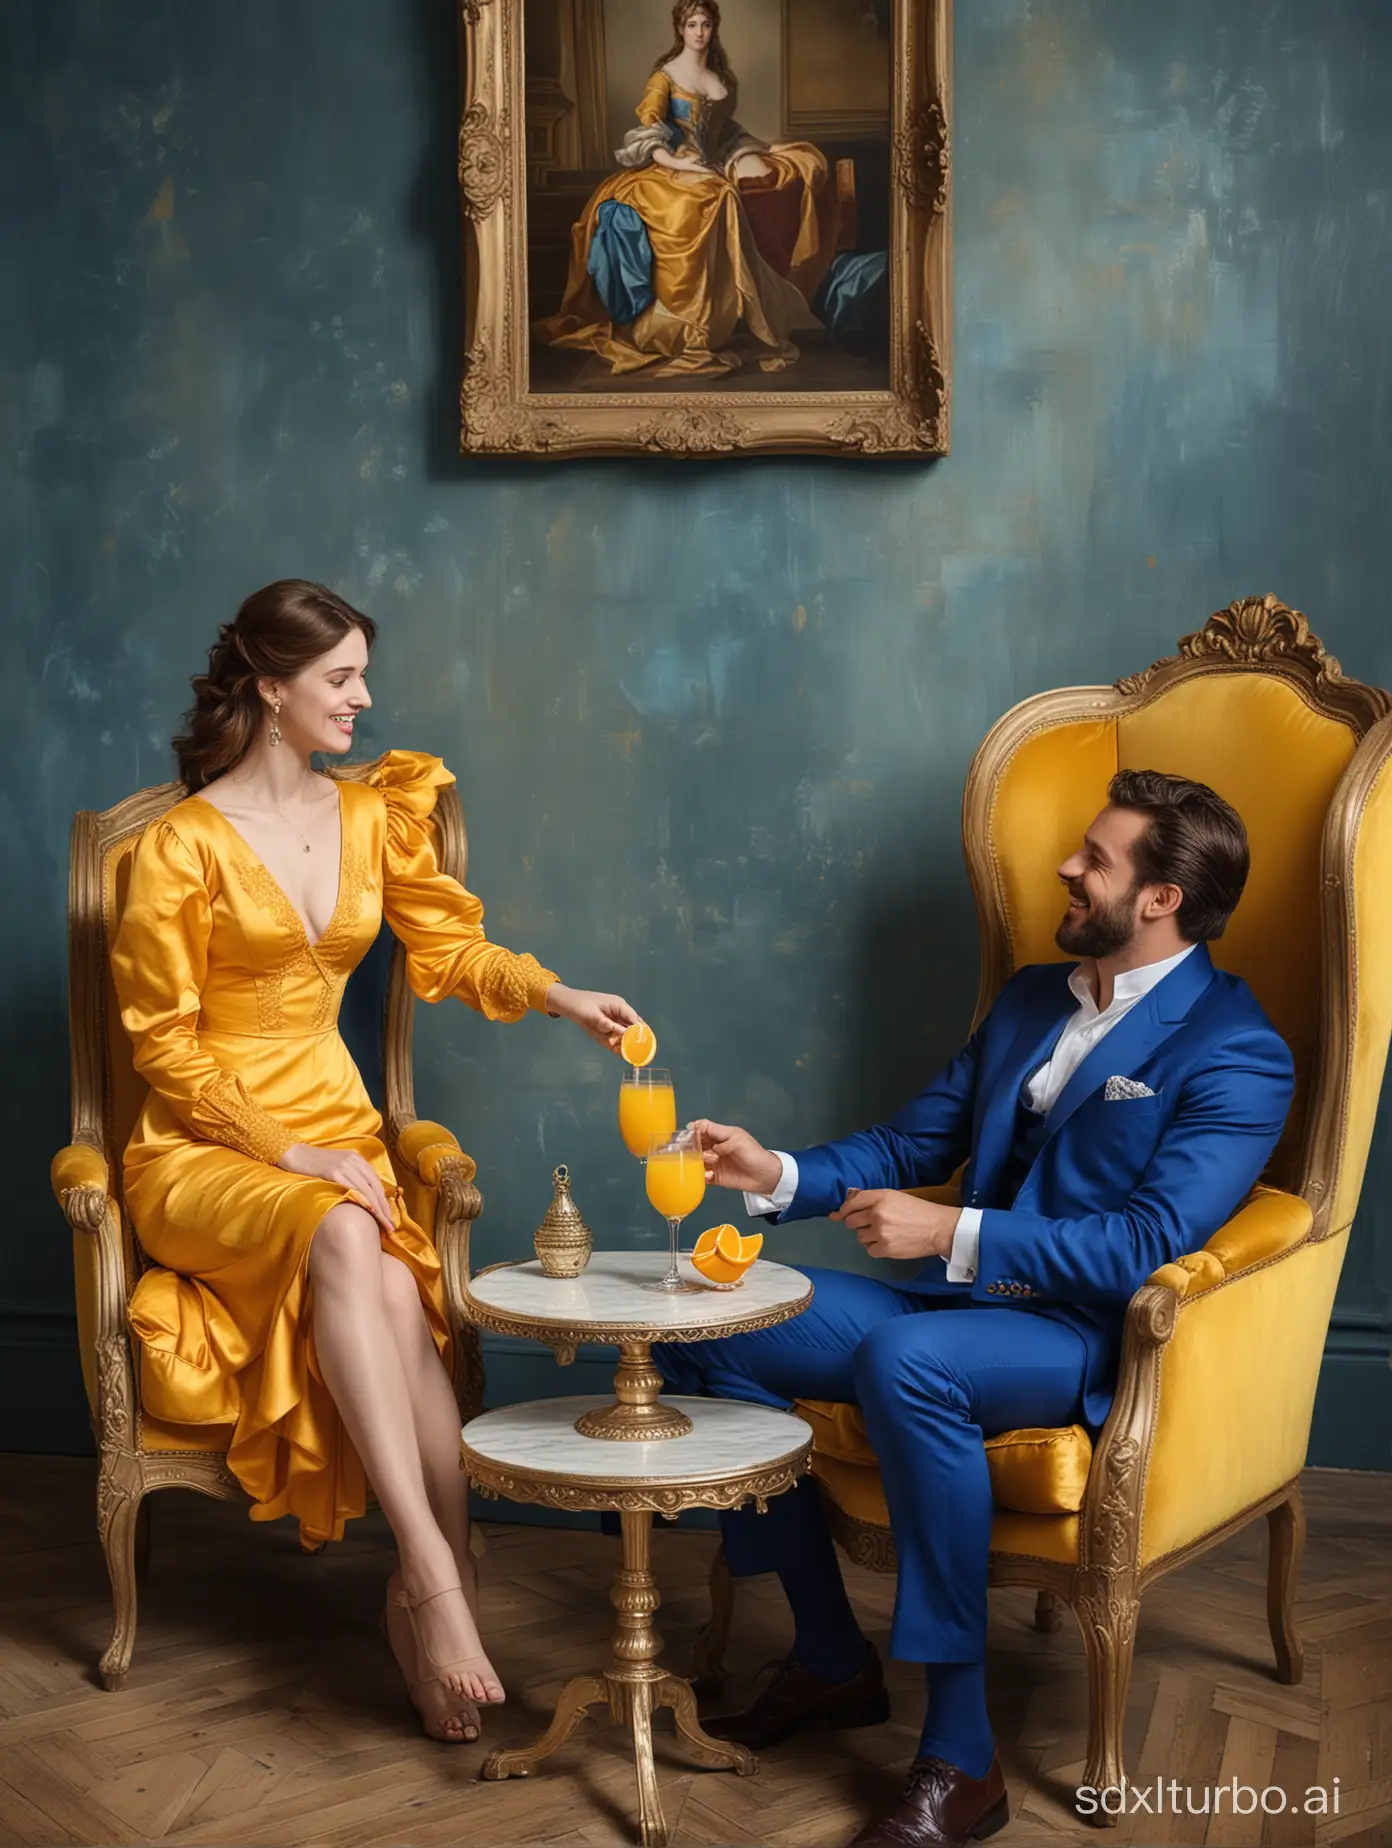 Generate an image with a man and a woman sitting in the corner of a room together, they are holding a glass of orange juice and smiling to each other. They are sitting in Victorian blue armchairs. The man is wearing a royal blue suit. The woman is wearing an elegant yellow dress in satin. The room is chic with royal paintings on the blue wall. There is a small round table between the woman and the man. There is another round table made of glass beside the man and the woman with a jar of orange juice on top of it.